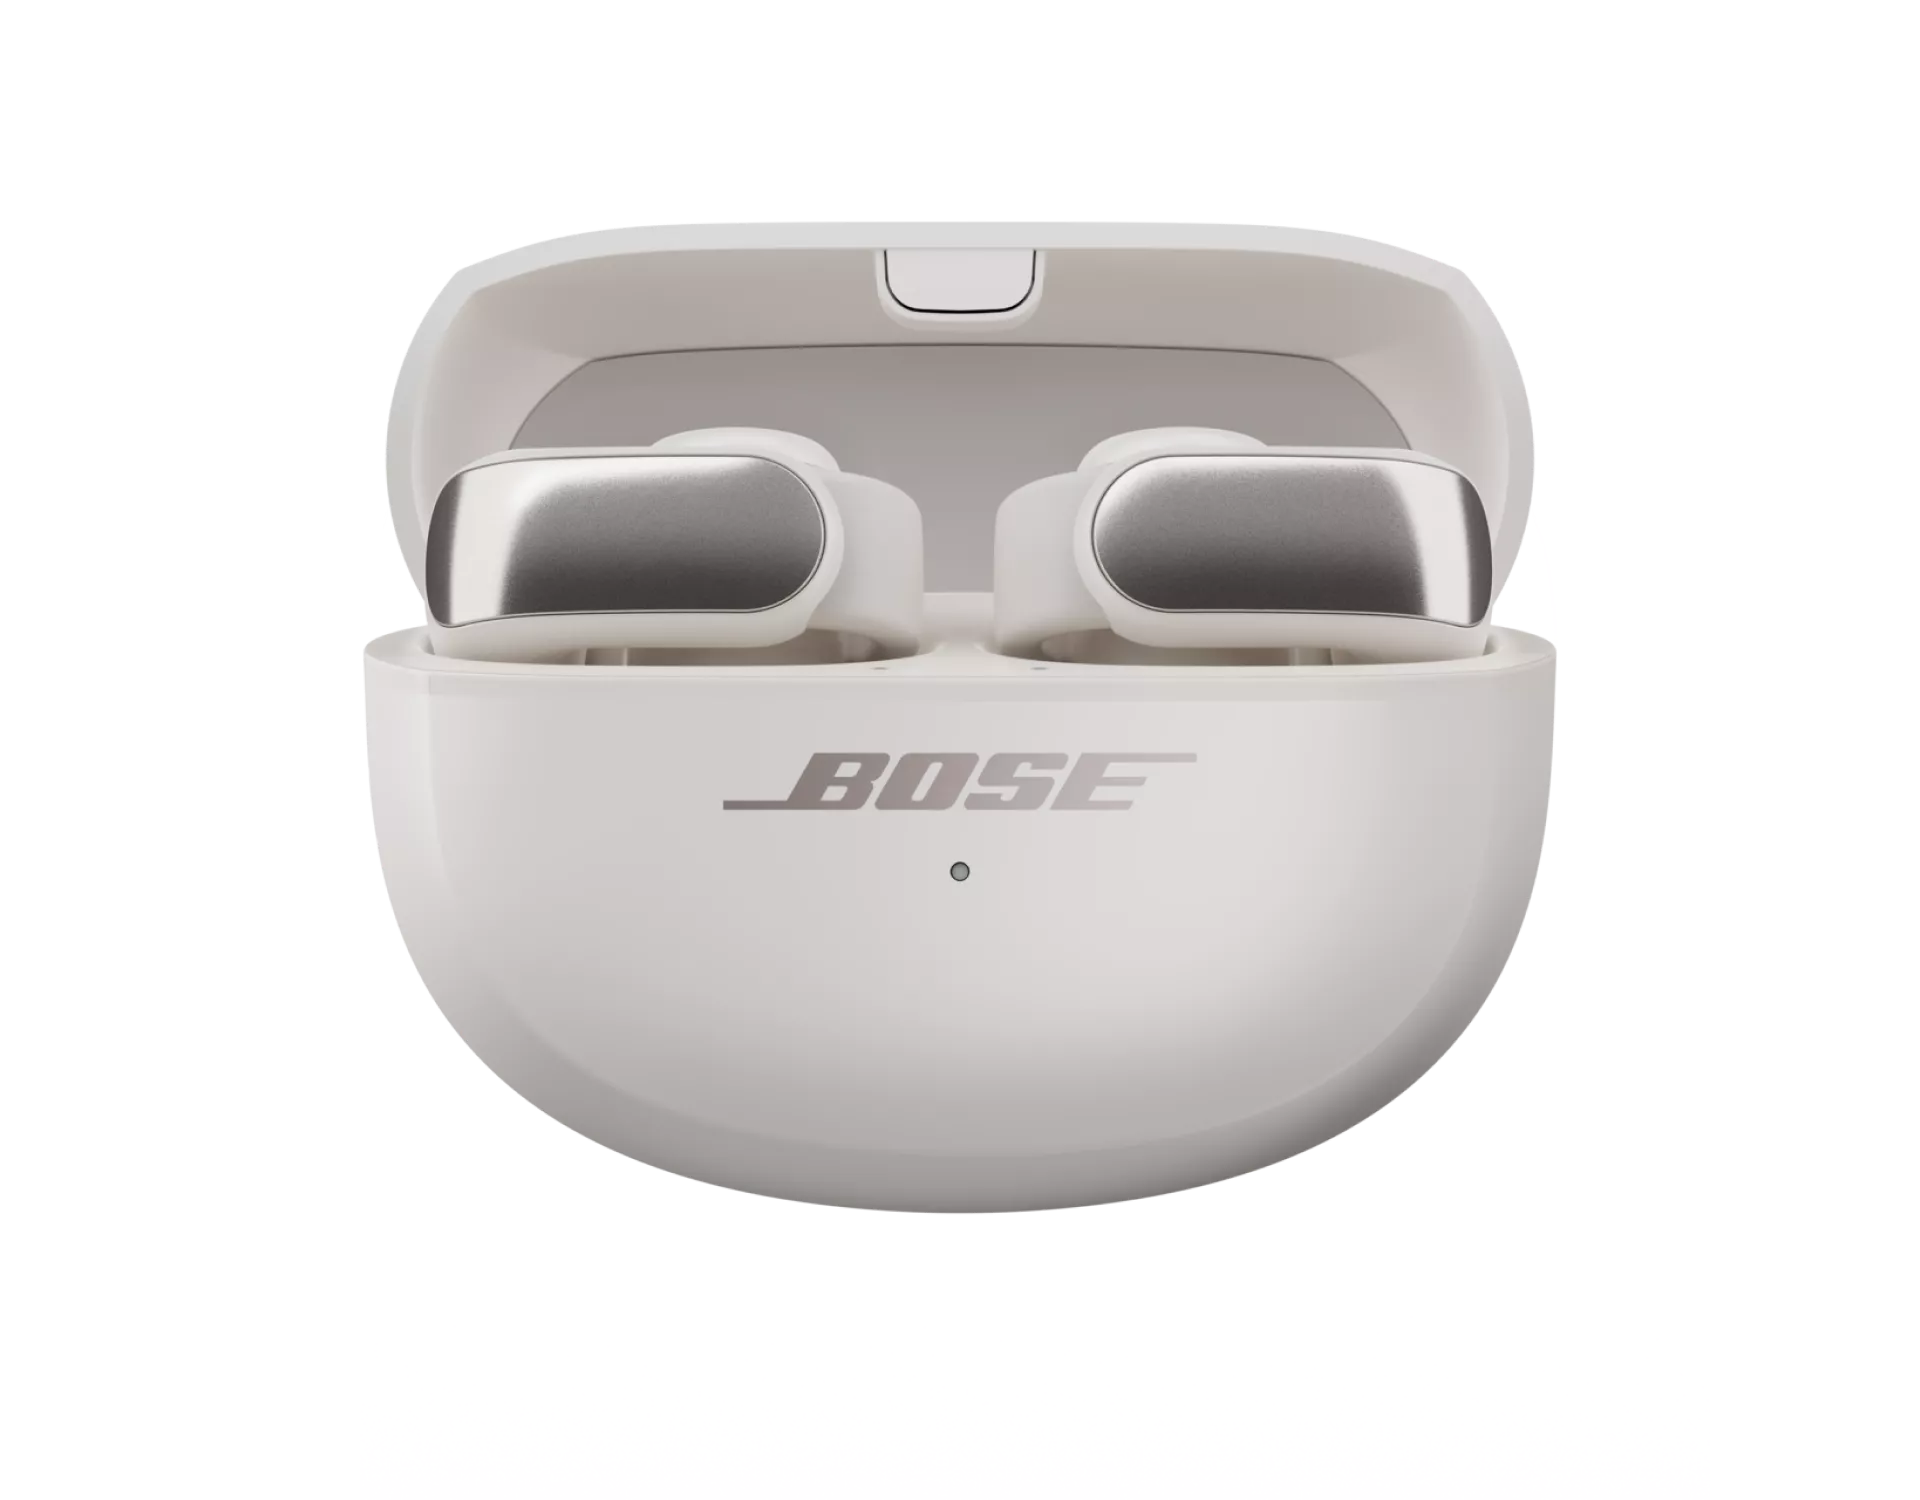 Bose Ultra Open Earbuds in their charging case